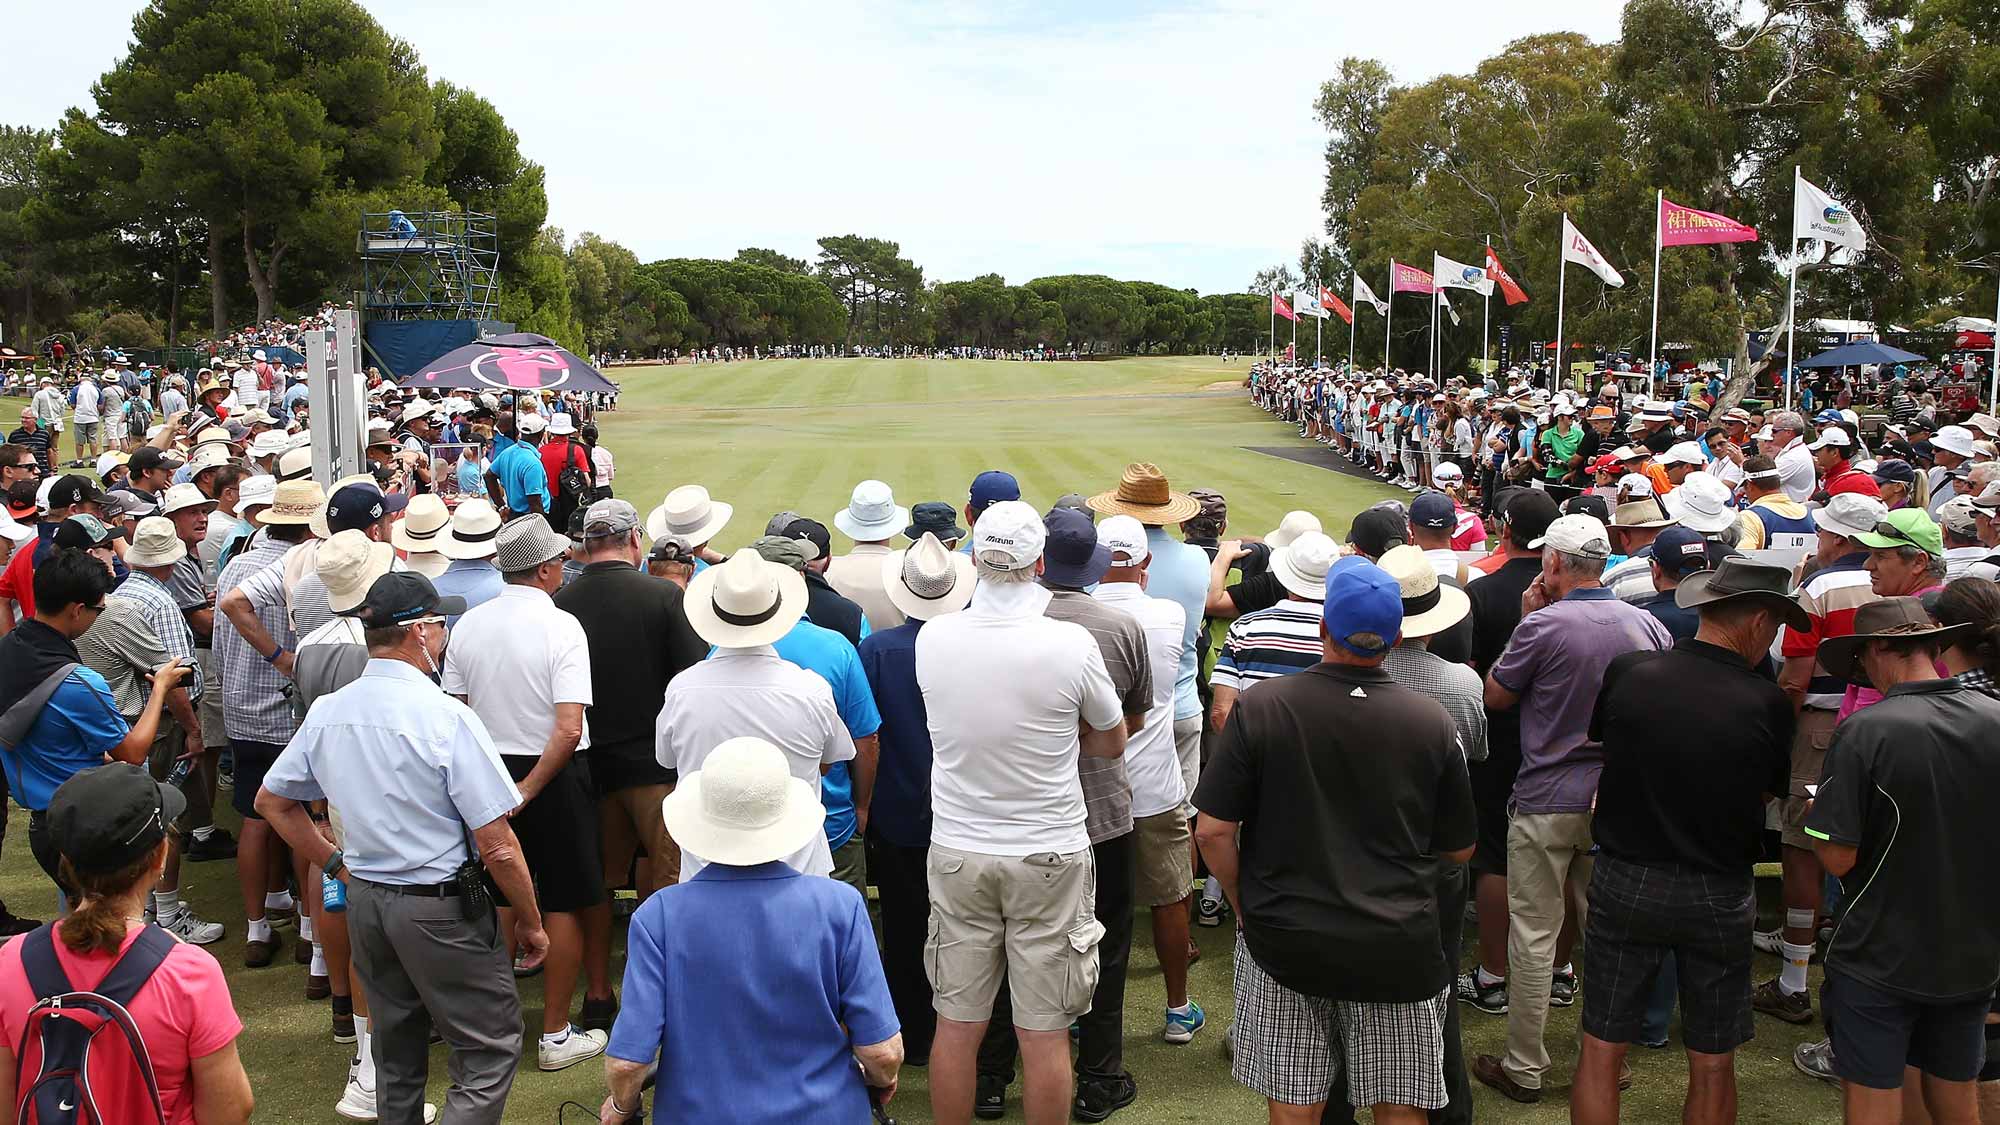 Spectators look on as Lydia Ko of New Zealand tees off during day two of the ISPS Handa Women's Australian Open at The Grange GC